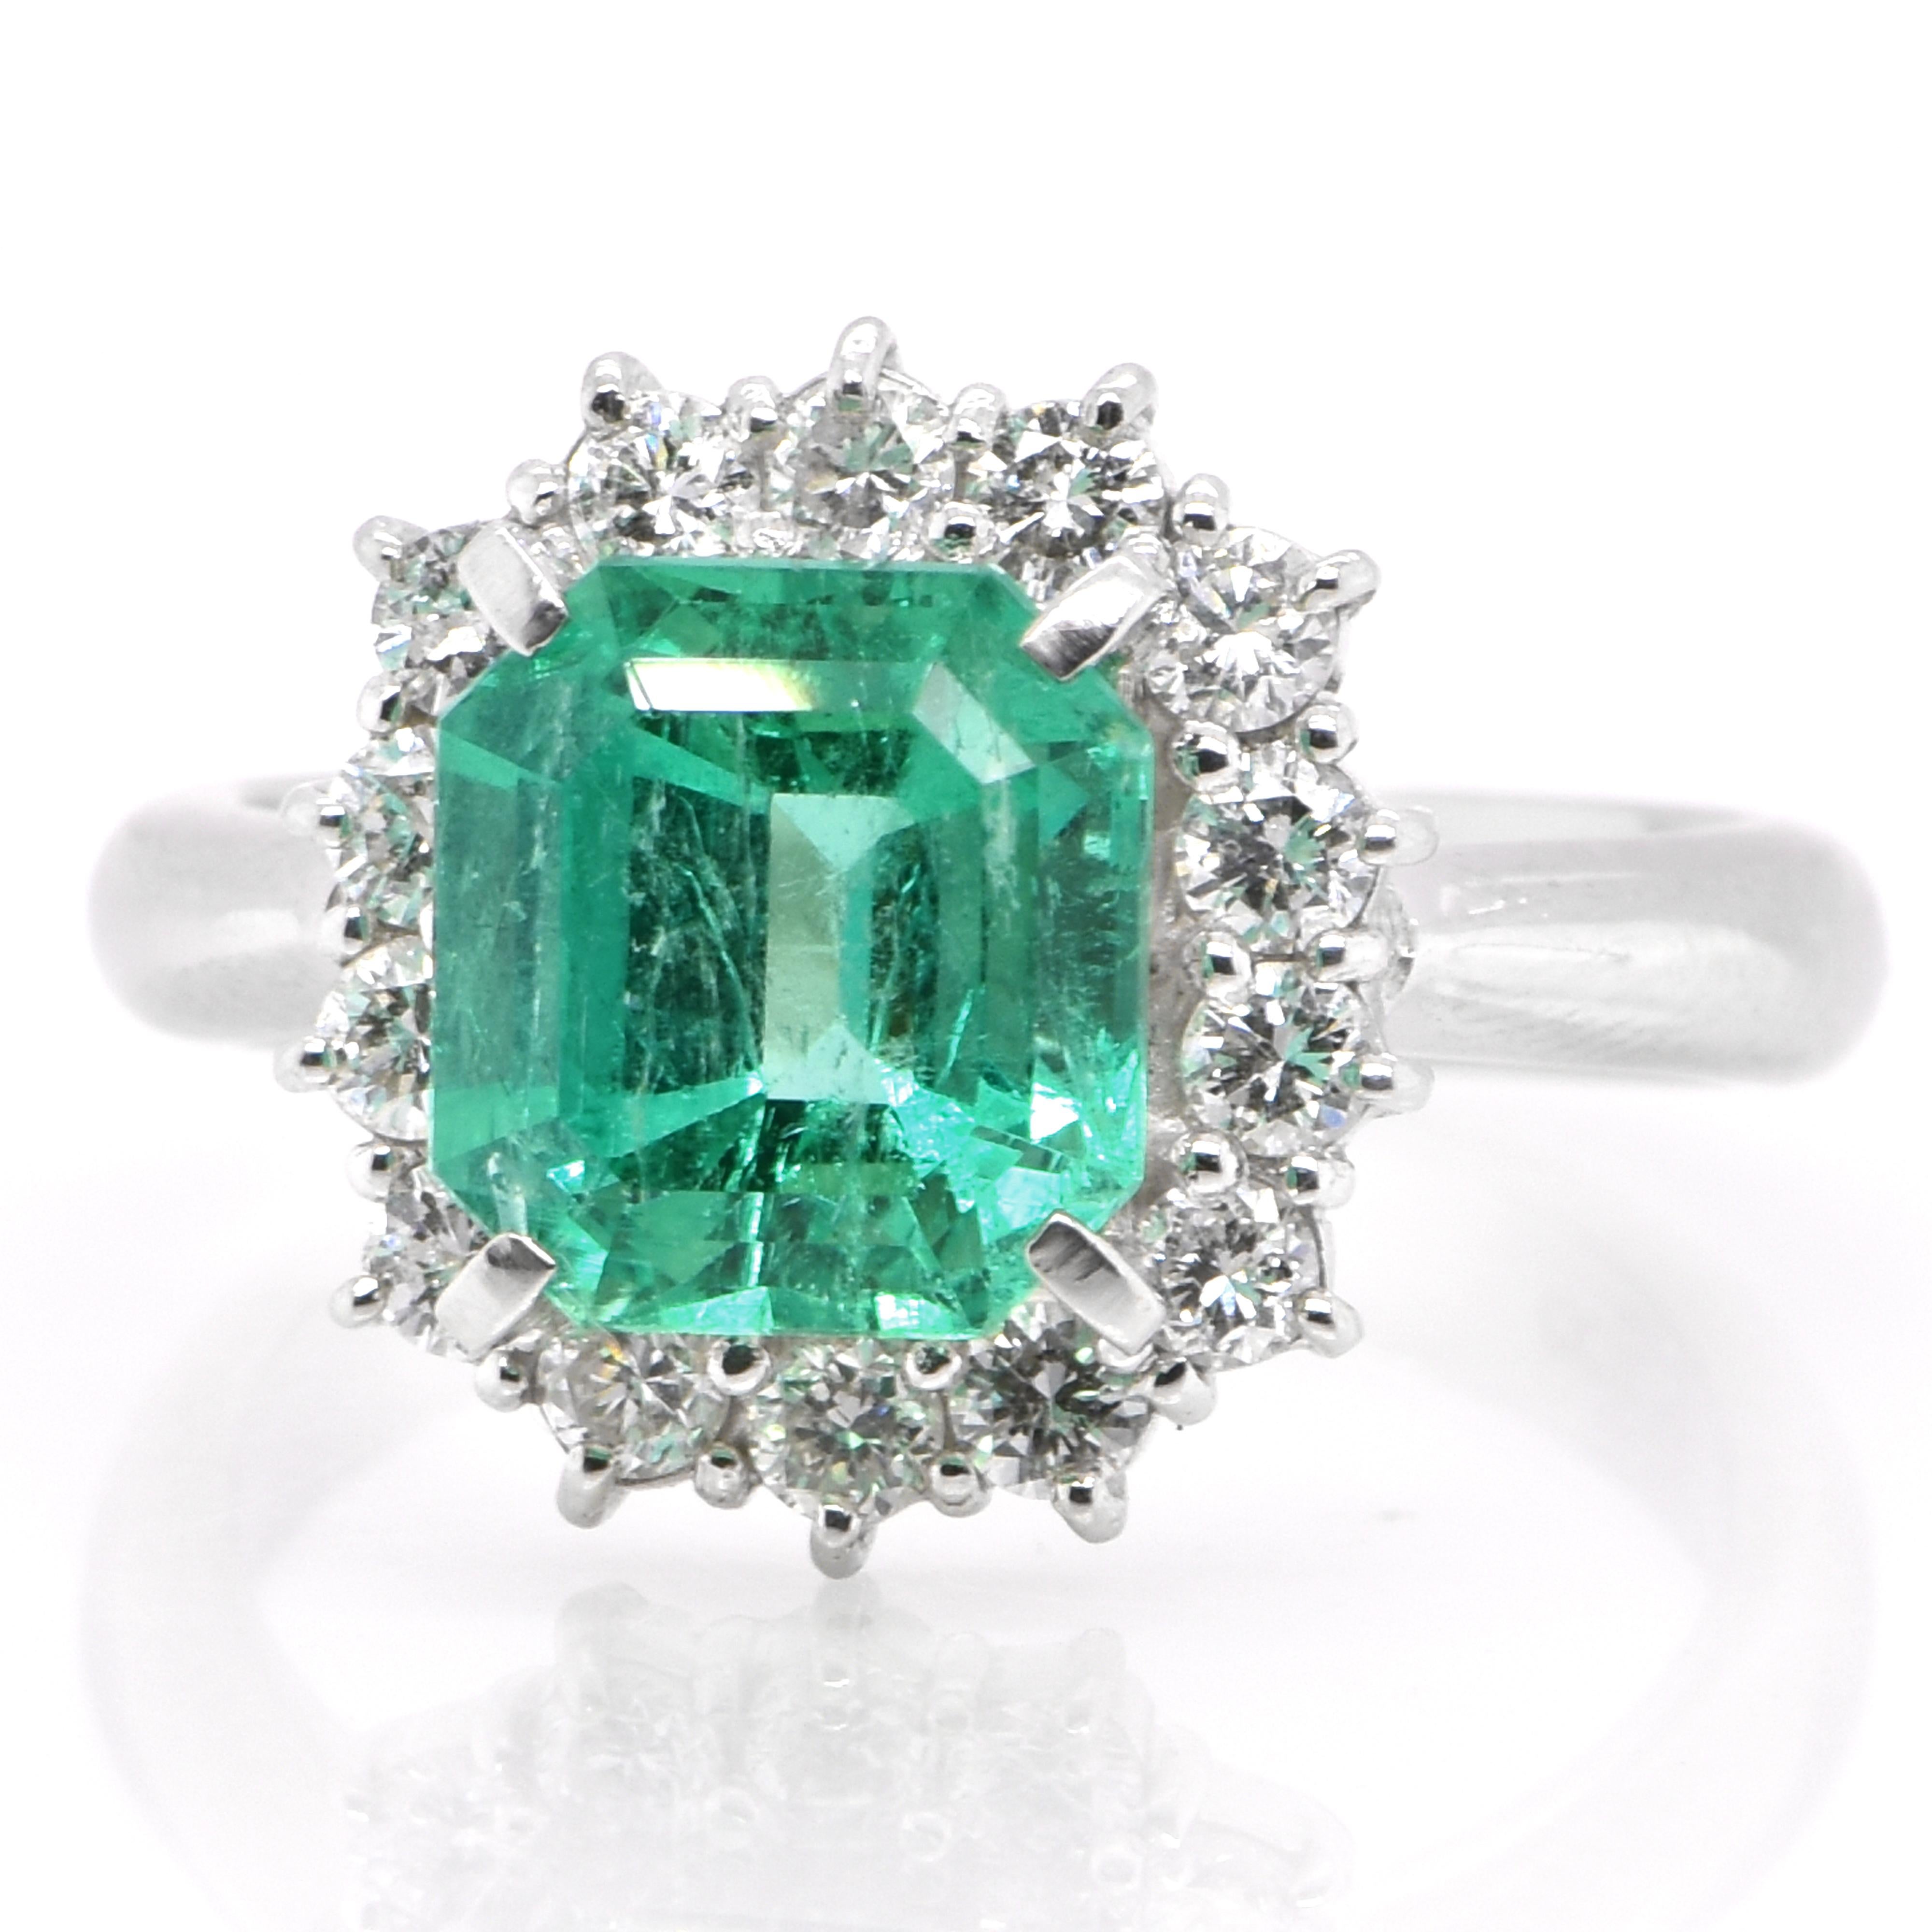 A stunning ring featuring a 2.79 Carat Natural Colombian Emerald and 0.67 Carats of Diamond Accents set in Platinum. People have admired emerald’s green for thousands of years. Emeralds have always been associated with the lushest landscapes and the